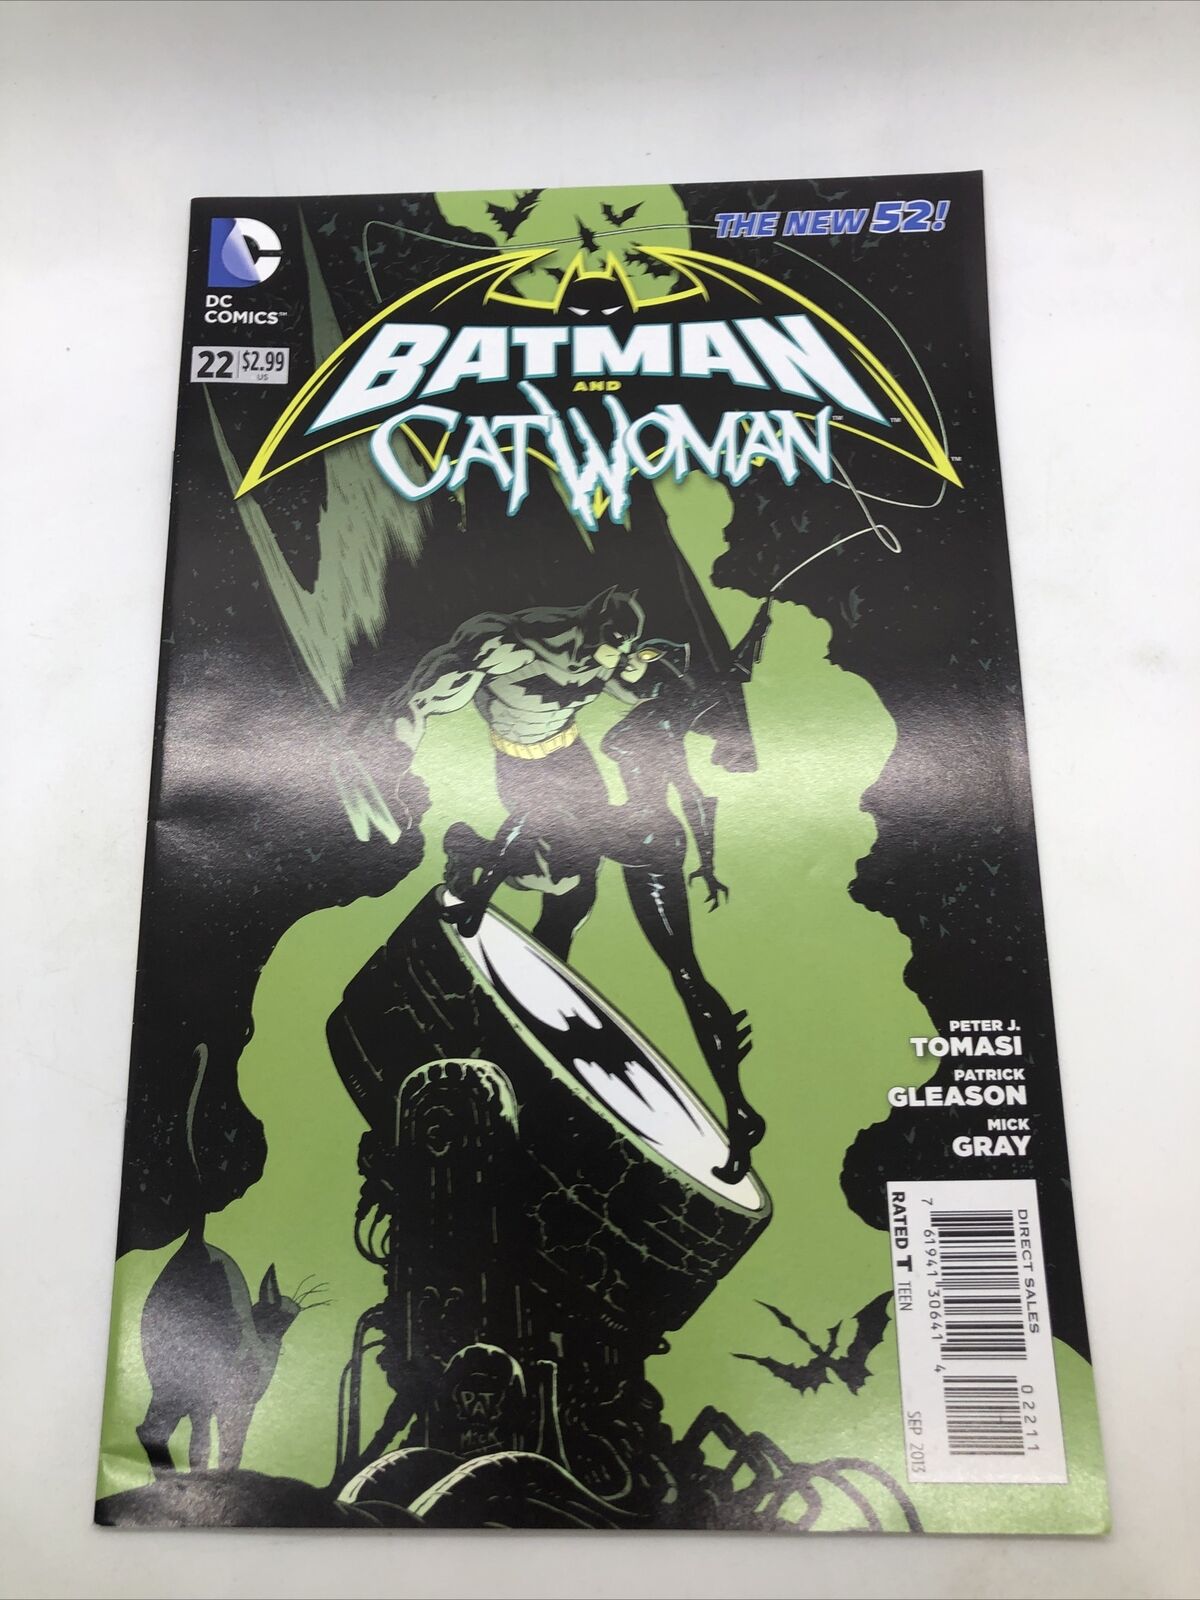 BATMAN AND CATWOMAN #22 (2013 DC)